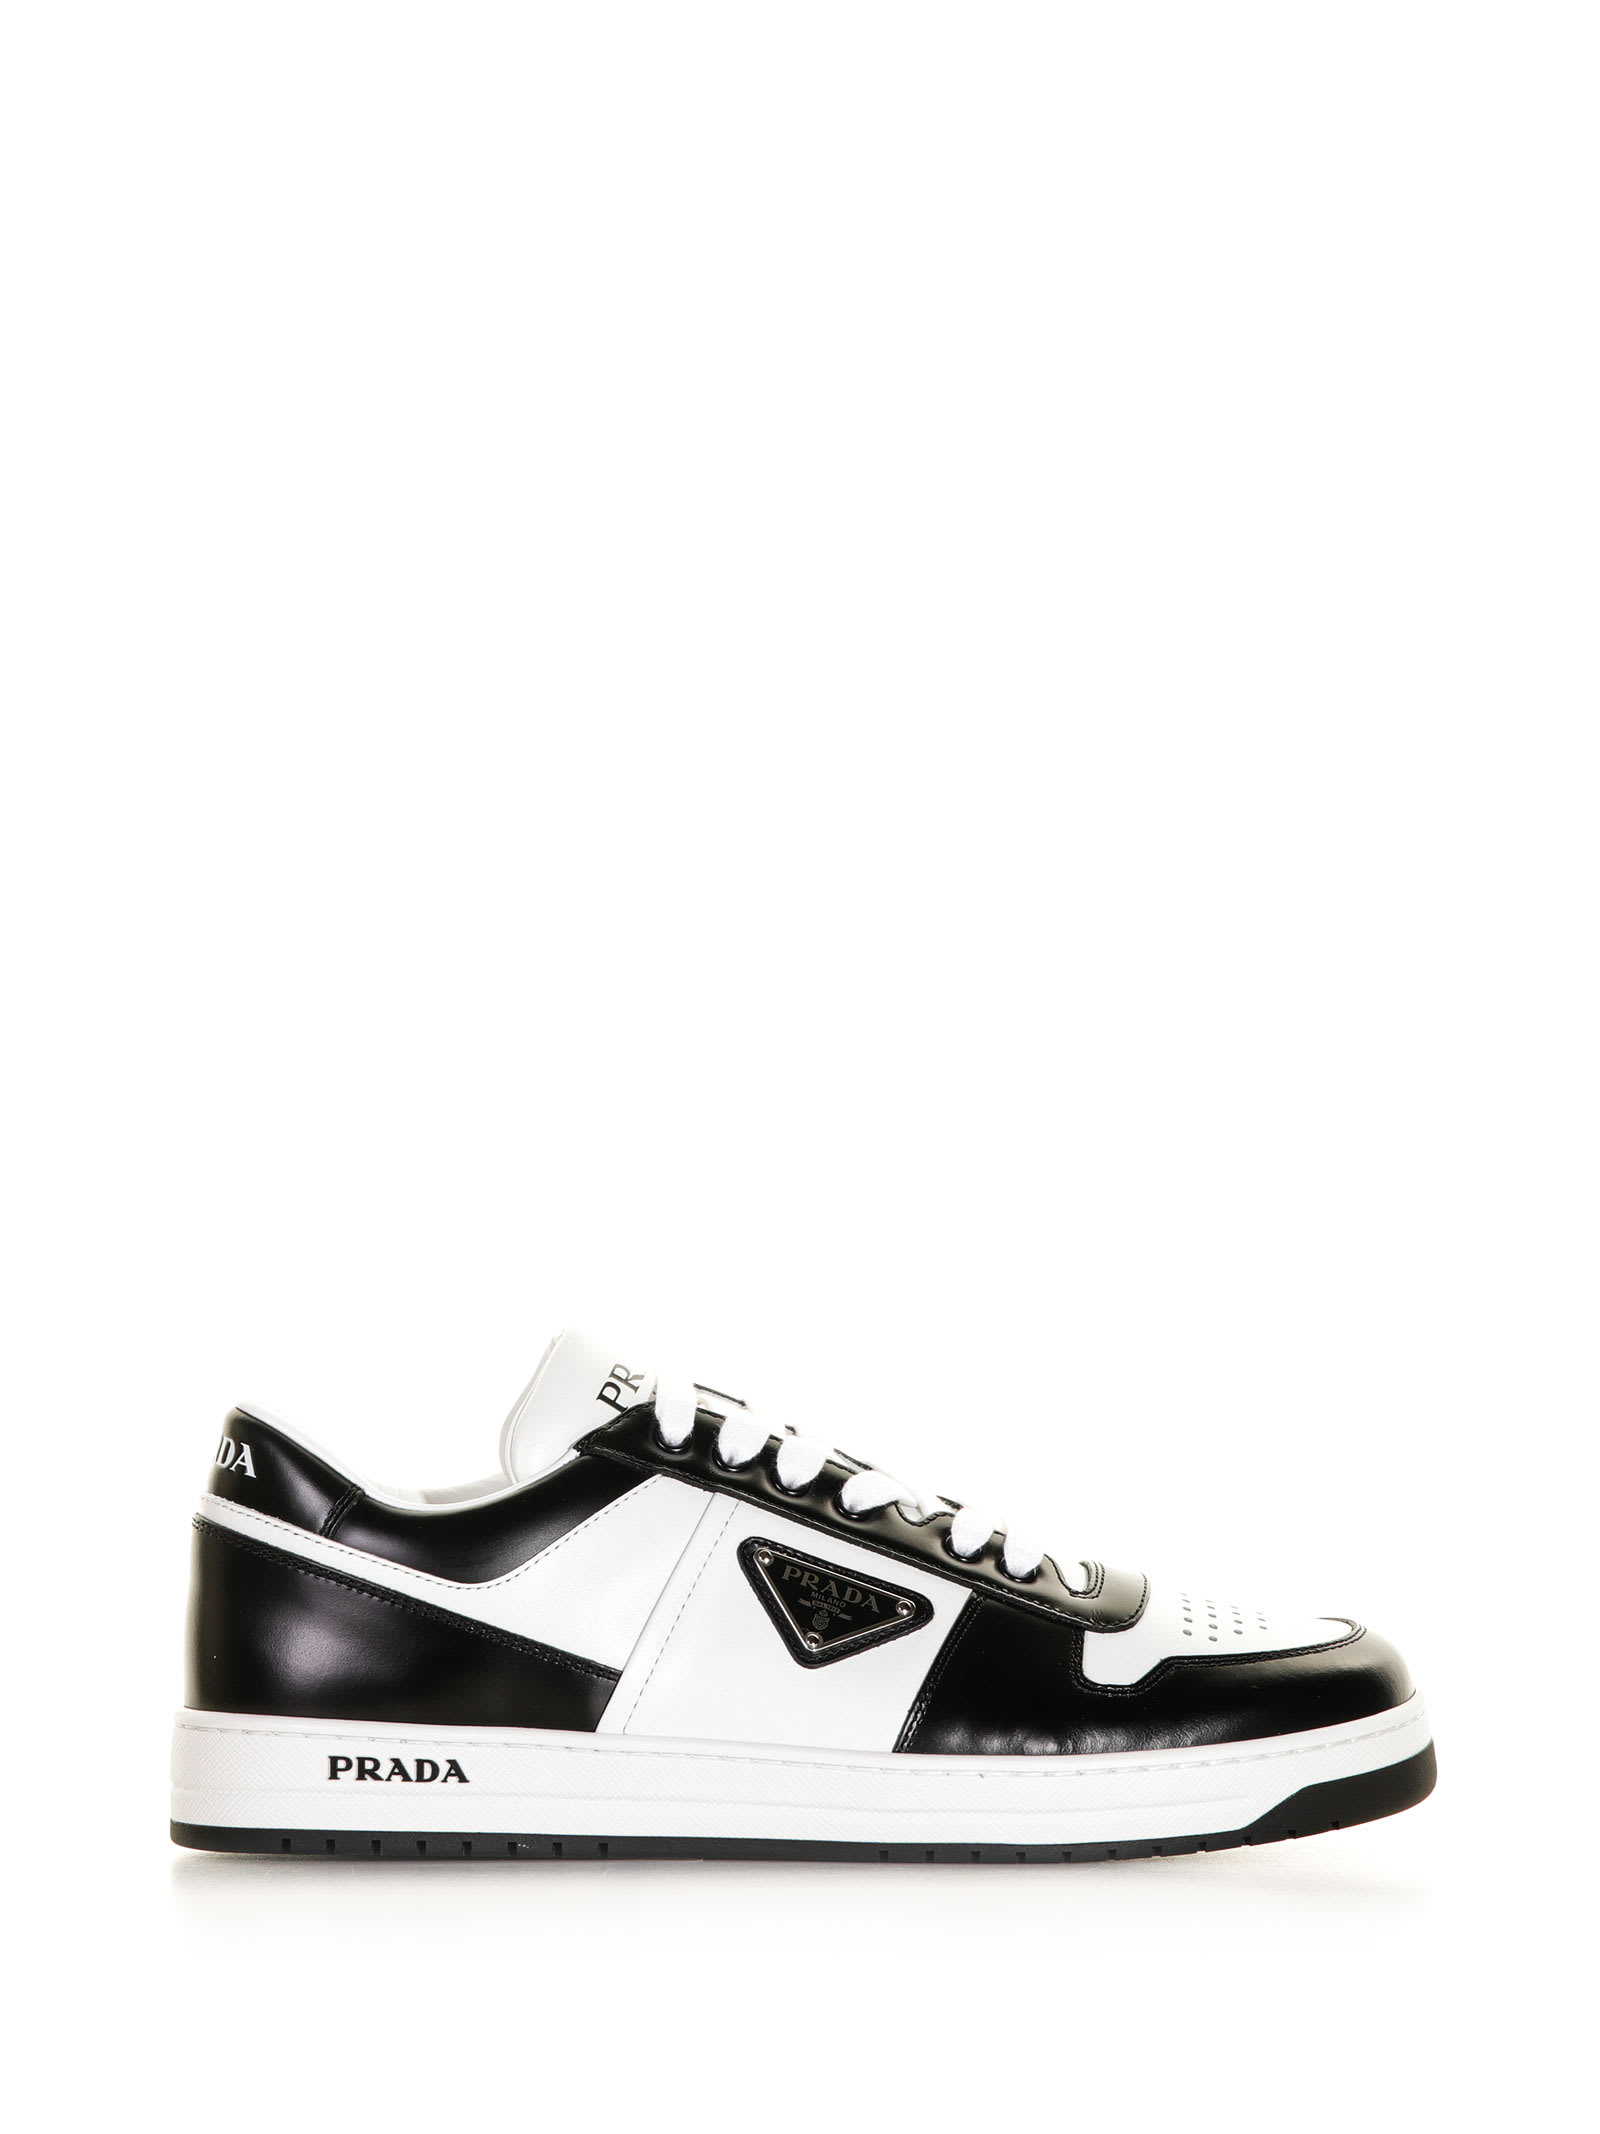 PRADA DOWNTOWN SNEAKERS IN LEATHER